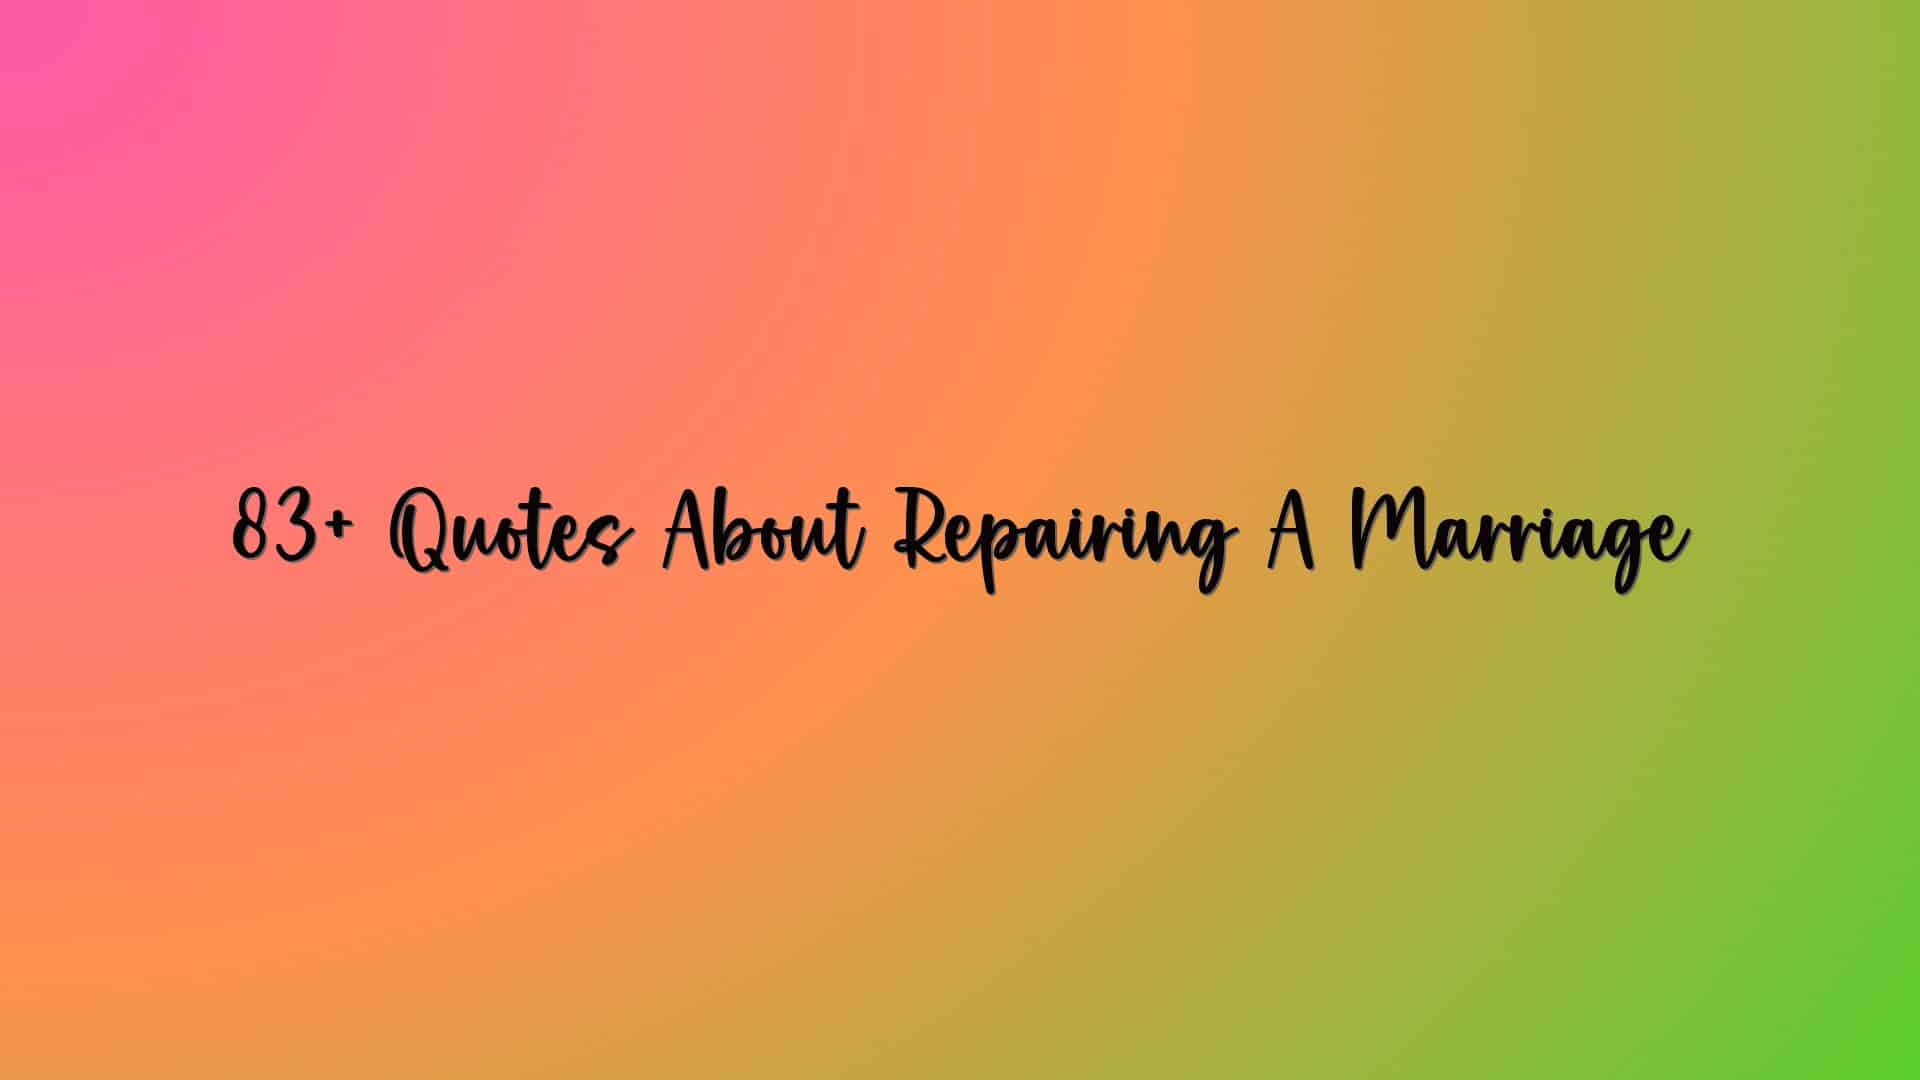 83+ Quotes About Repairing A Marriage